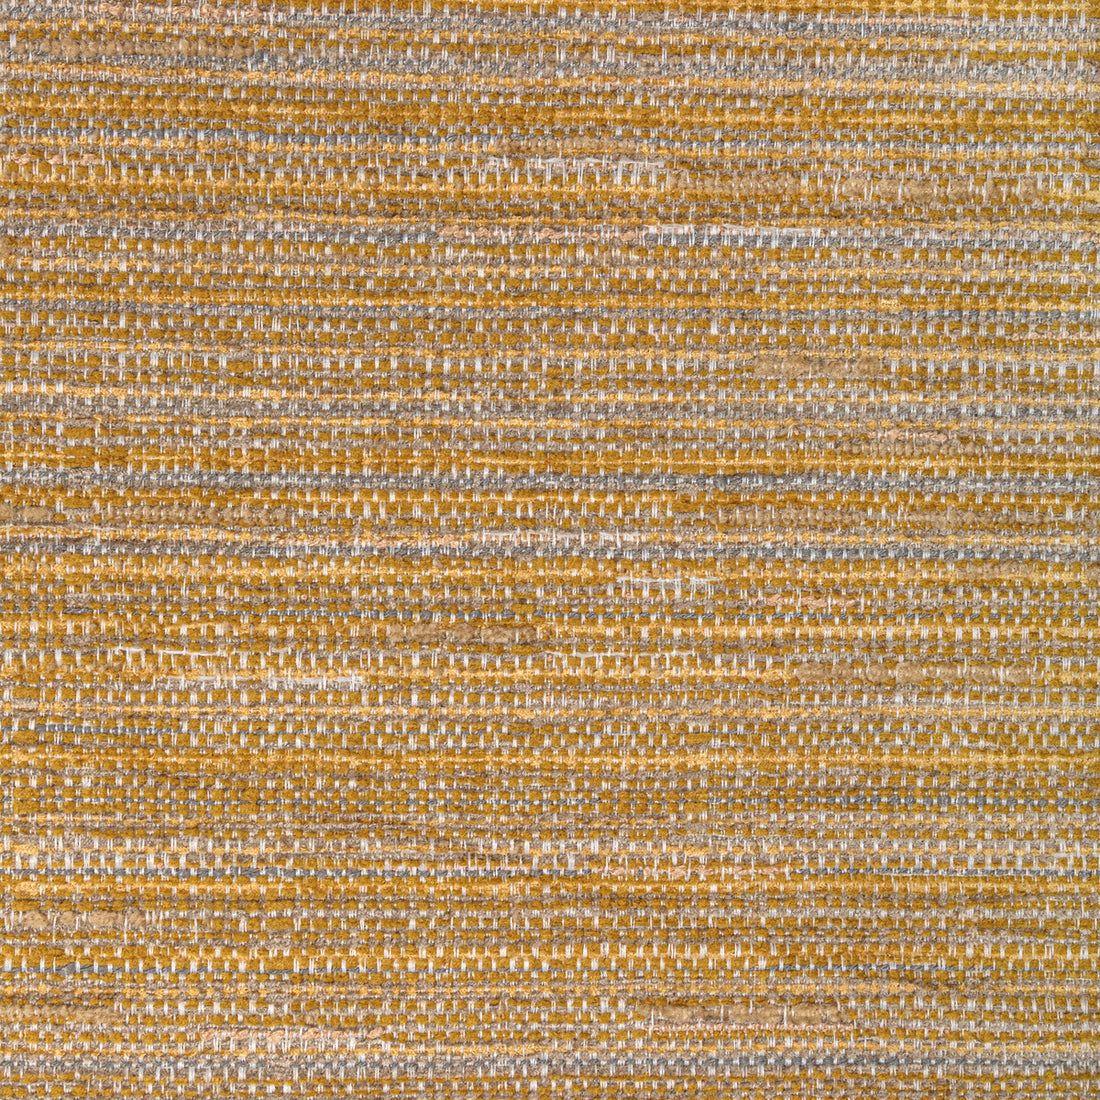 Reclaim fabric in citrine color - pattern 36566.4.0 - by Kravet Contract in the Seaqual collection